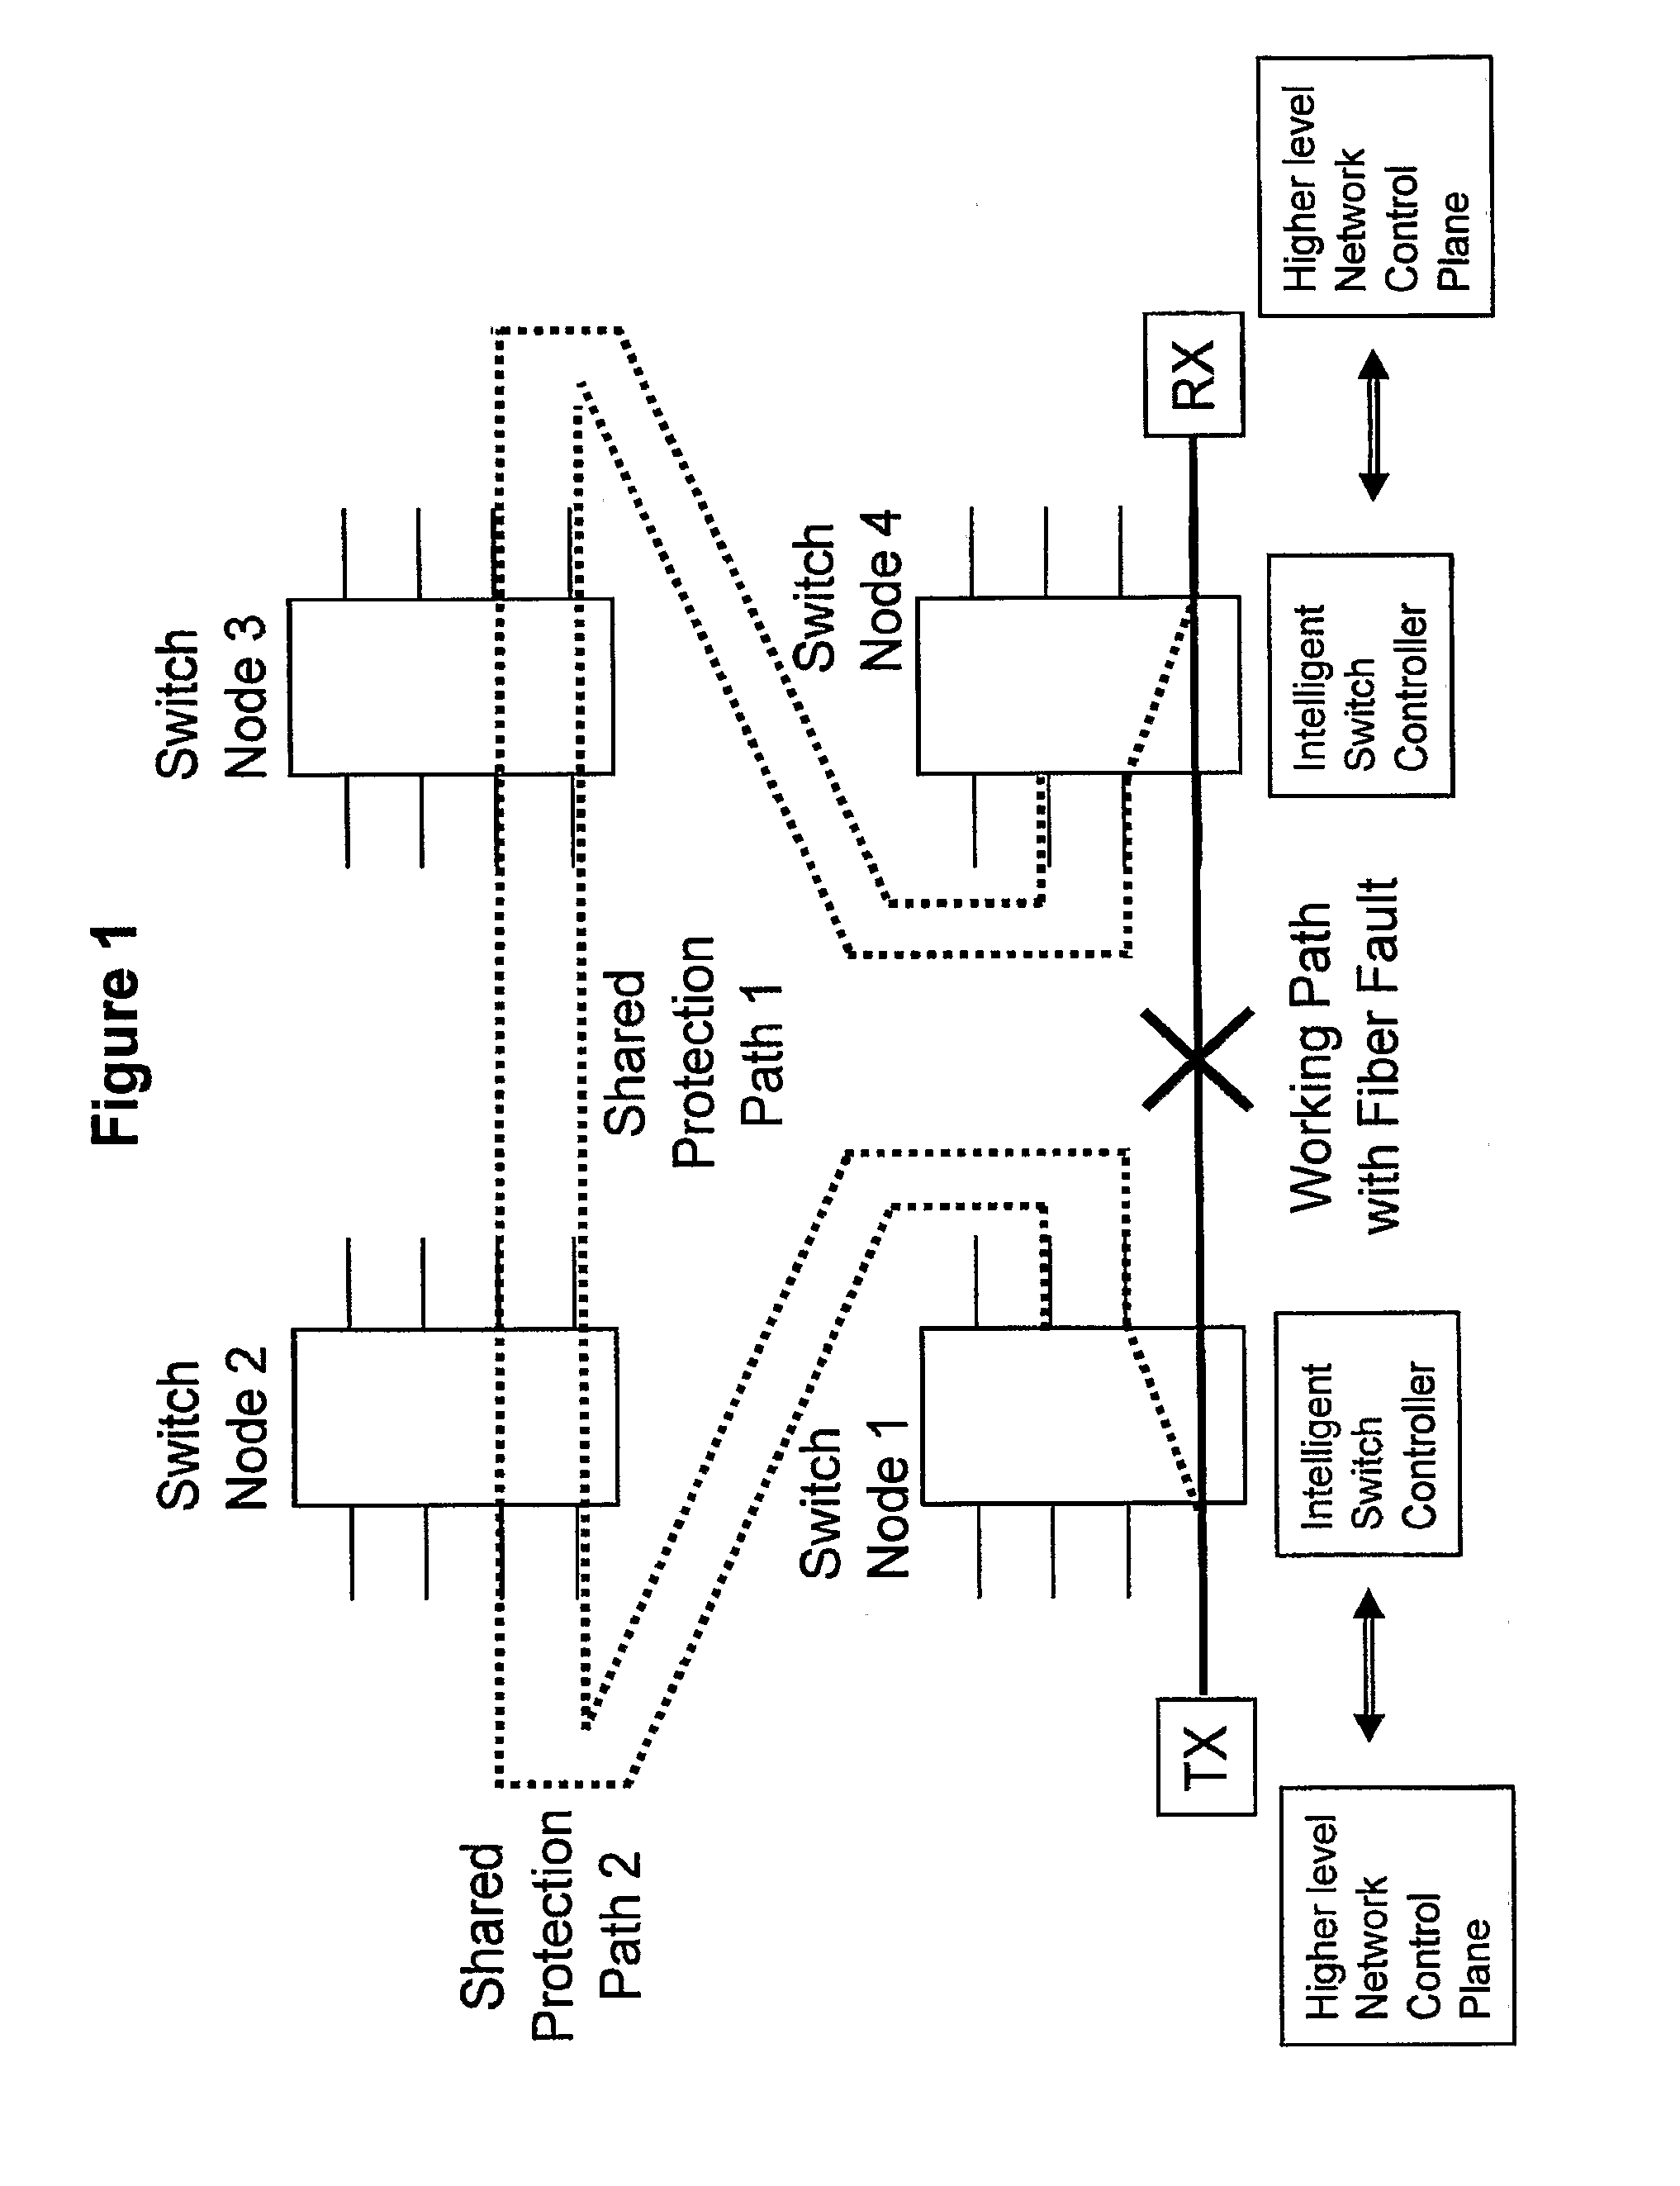 Network protection switching mechanisms and methods of network protection